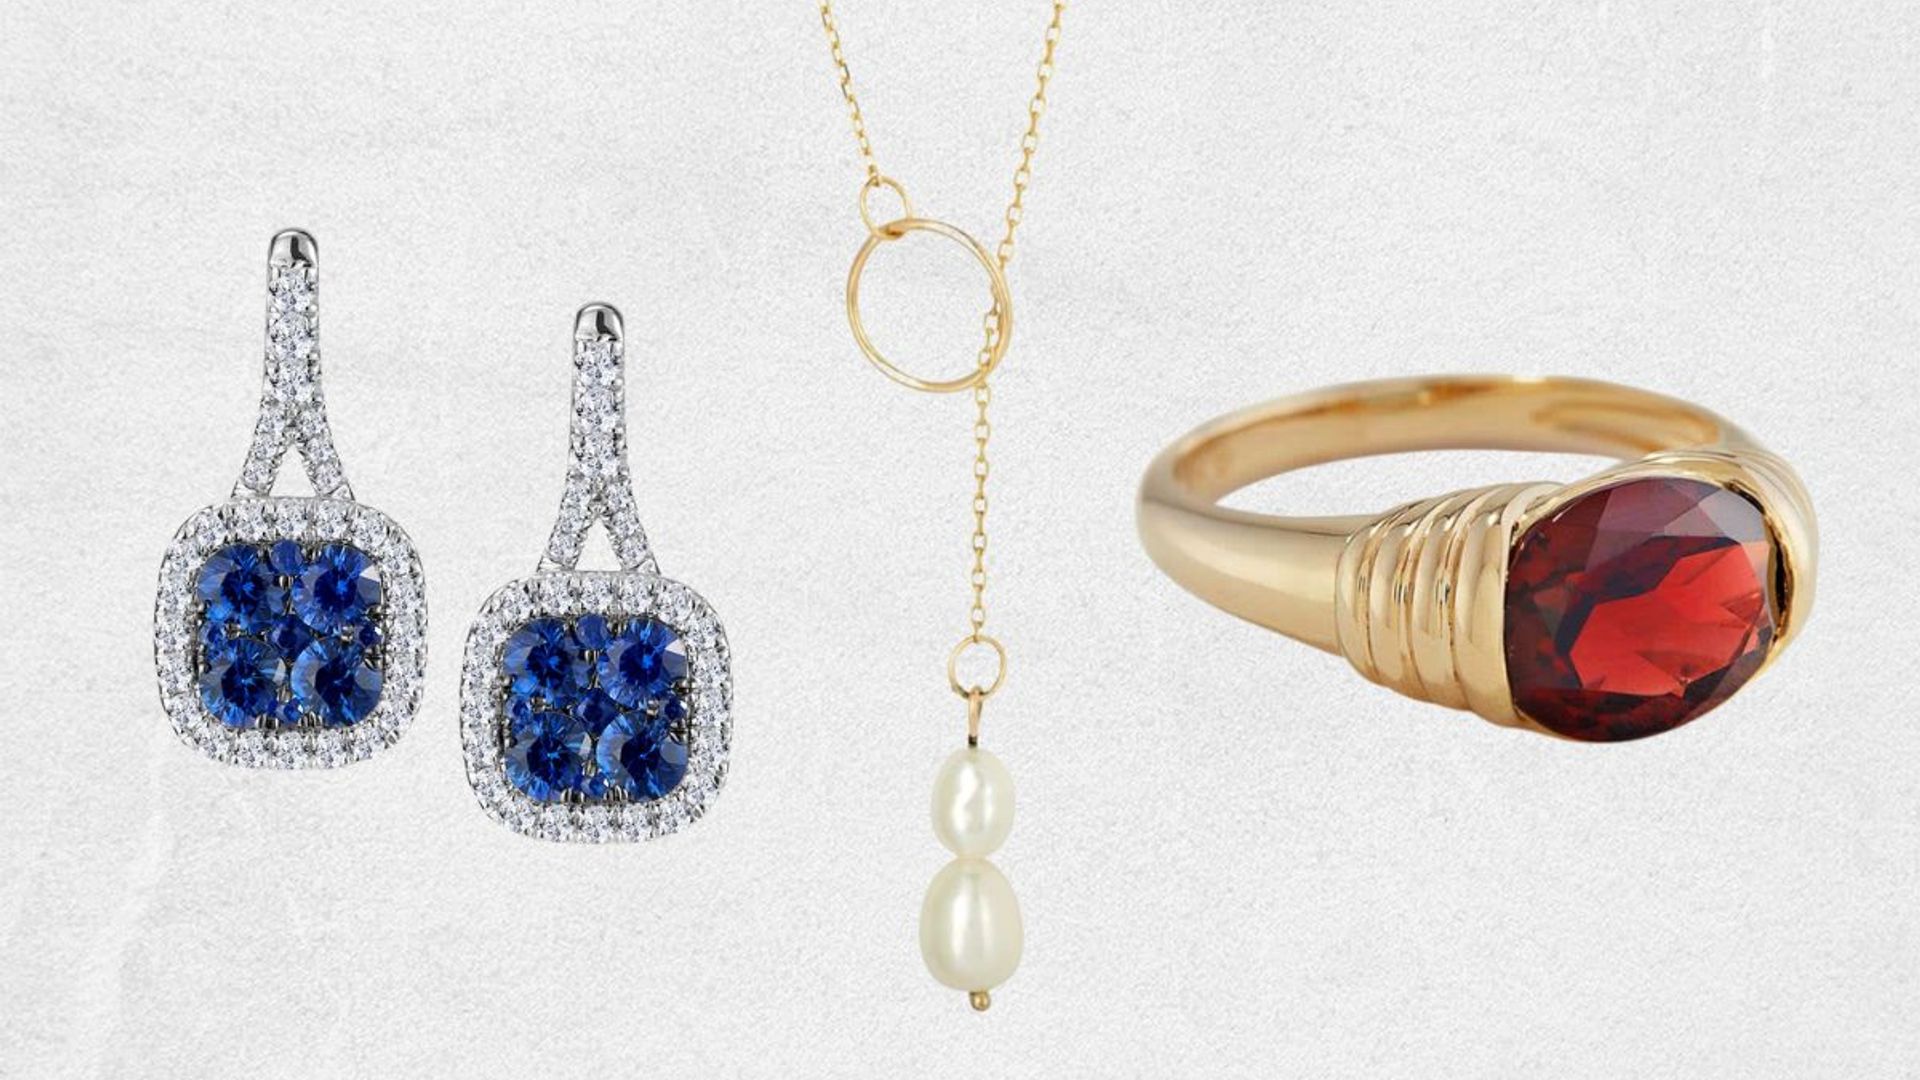 Ethical jewellery: the luxury pieces we'd most love to receive this Christmas